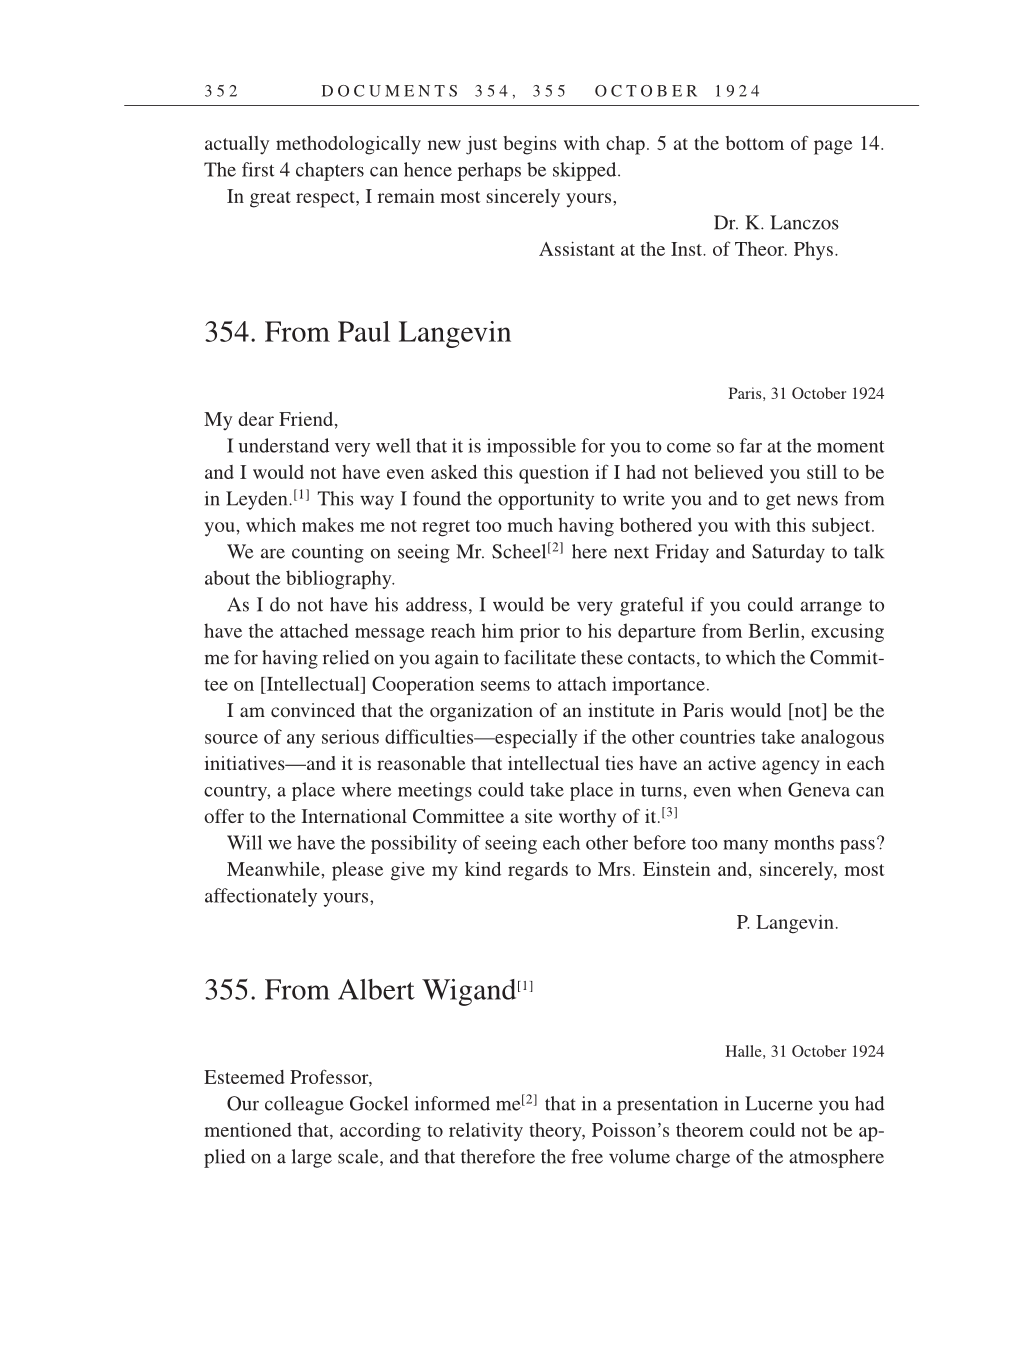 Volume 14: The Berlin Years: Writings & Correspondence, April 1923-May 1925 (English Translation Supplement) page 352